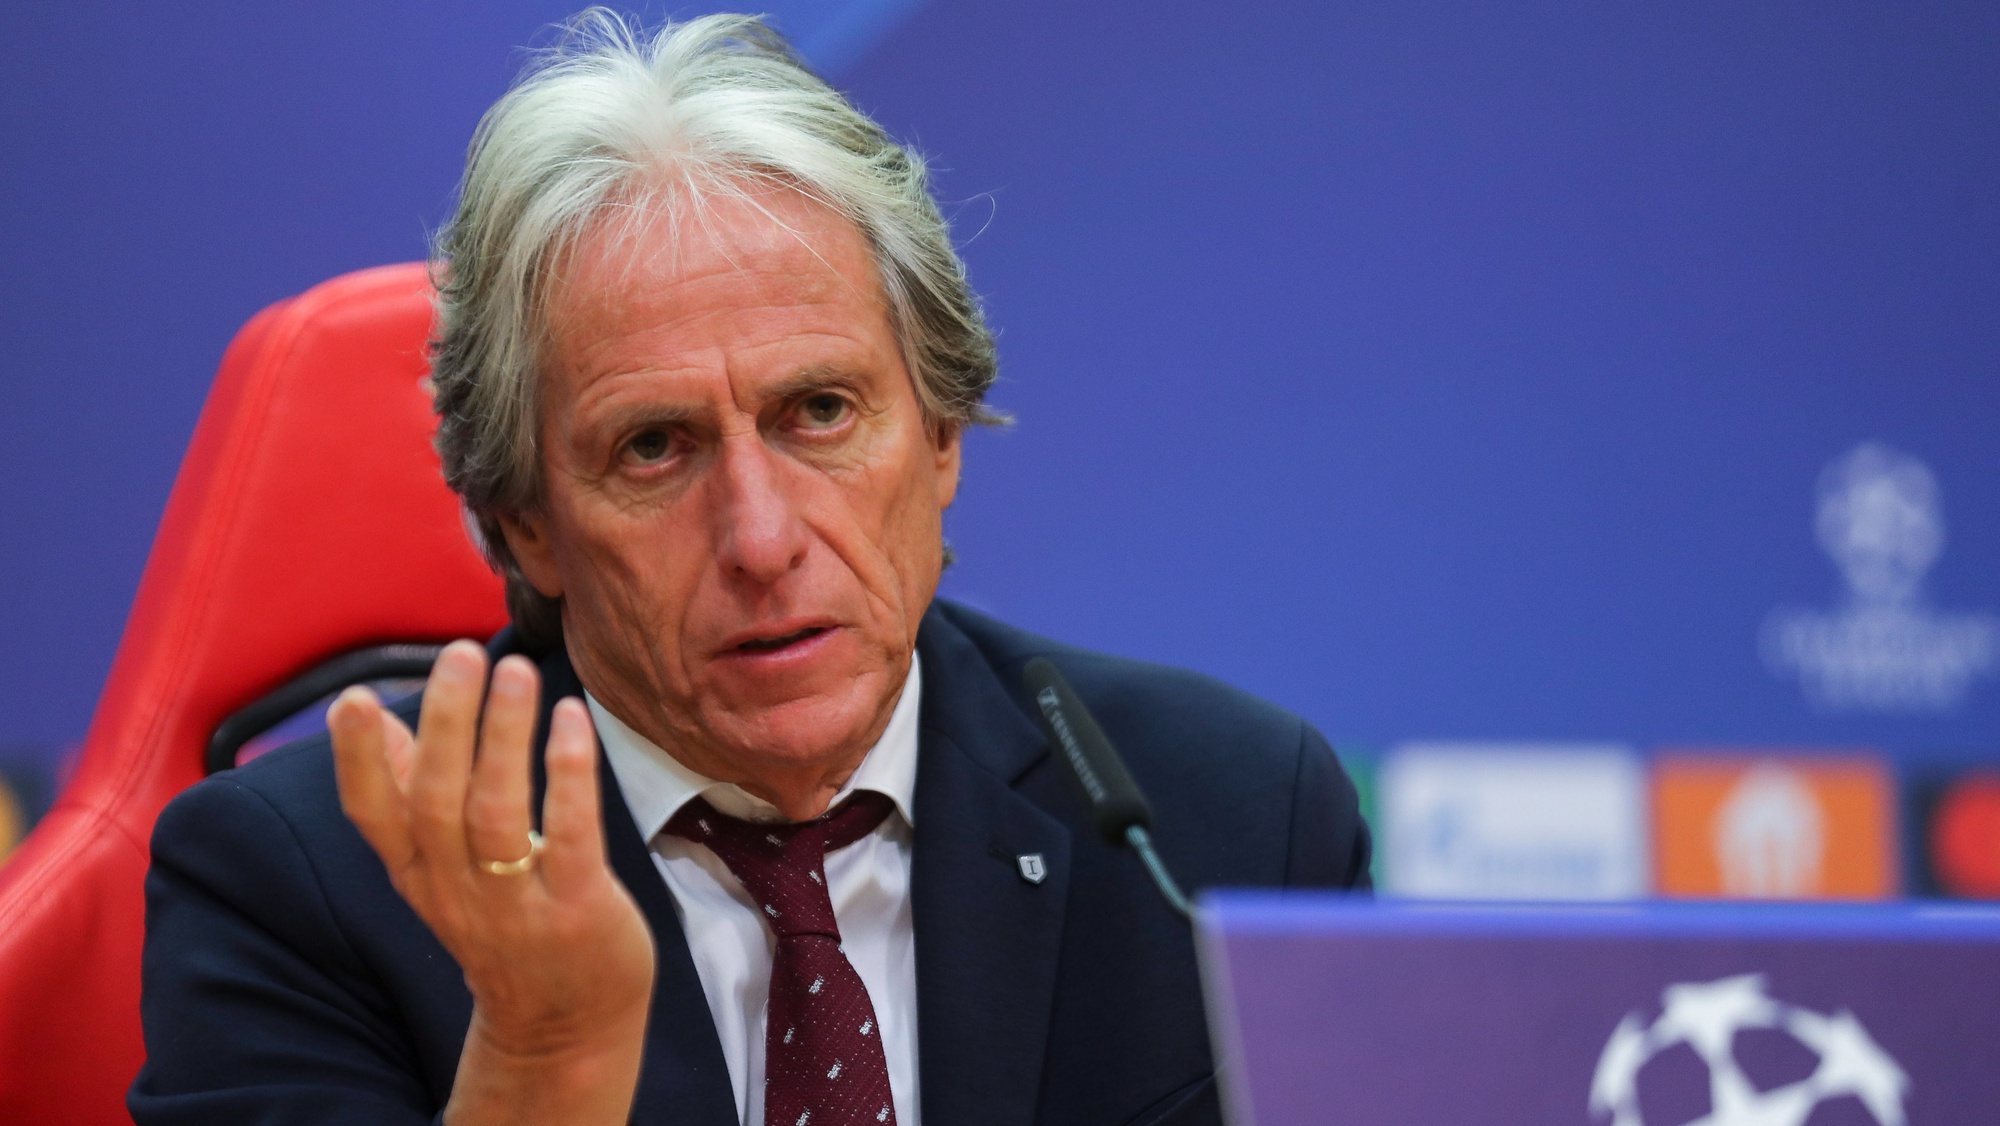 epa09597641 Benfica&#039;s head coach Jorge Jesus speaks during a press conference at Benfica Campus in Seixal, near Lisbon, Portugal, 22 November 2021. Benfica Lisbon will face FC Barcelona in their UEFA Champions League group E soccer match on 23 November 2021.  EPA/MIGUEL A. LOPES